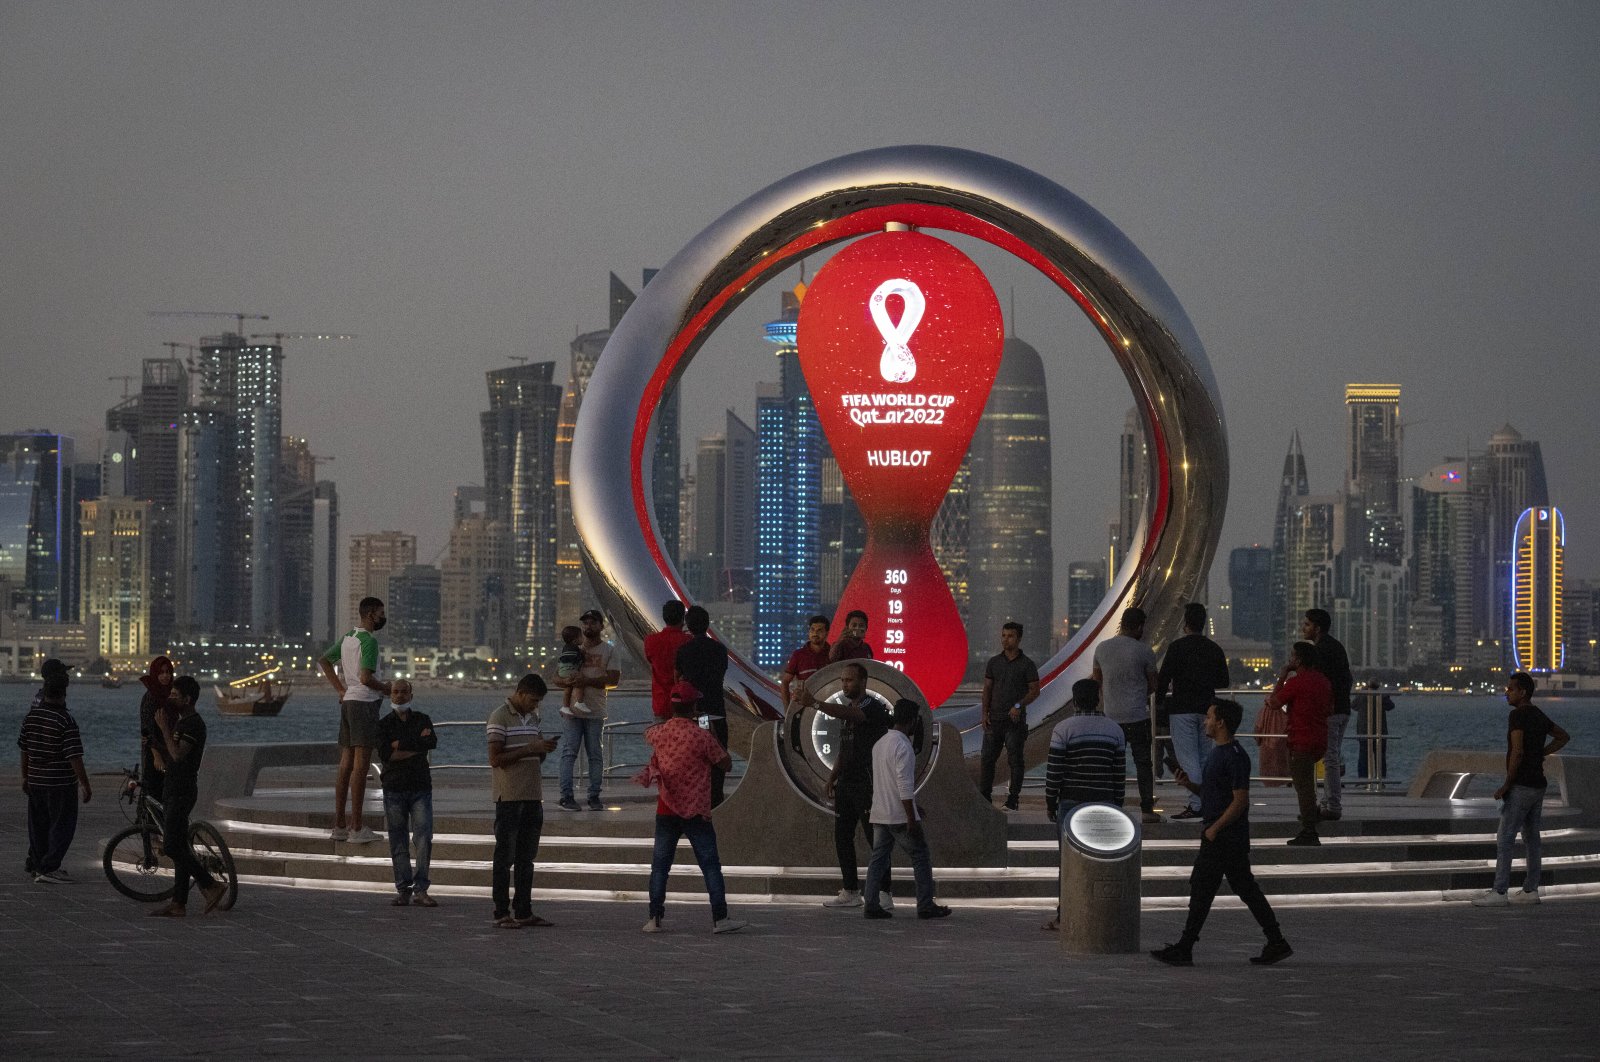 People gather around the official countdown clock of the World Cup 2022, Doha, Qatar, Thursday, Nov. 25, 2021. (AP Photo)